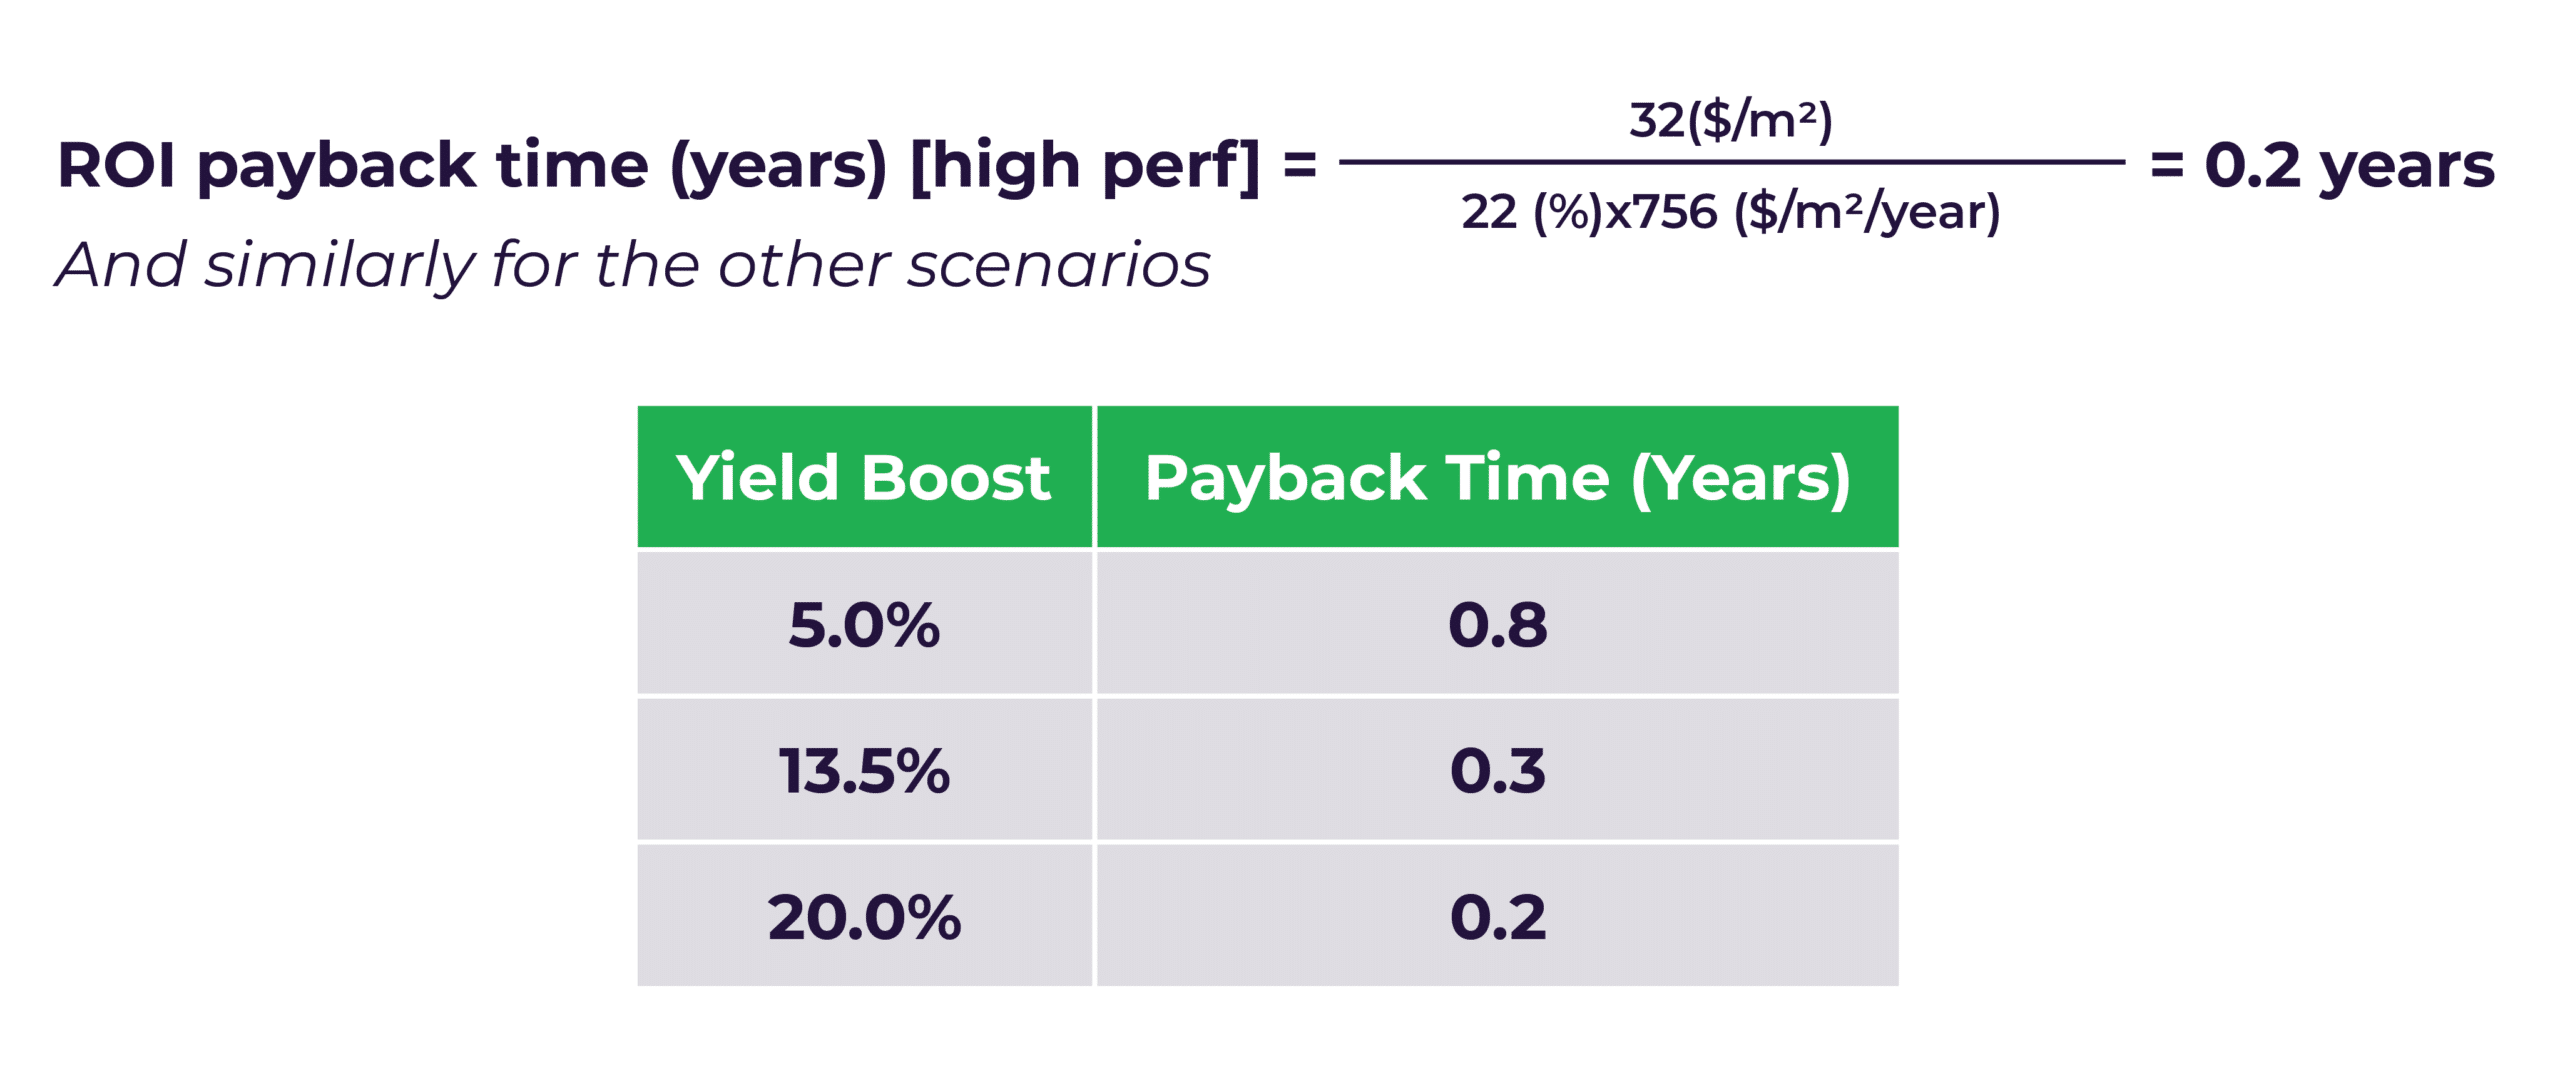 Calculating The Return On Investment Payback Time For Yield-Enhancing Technologies